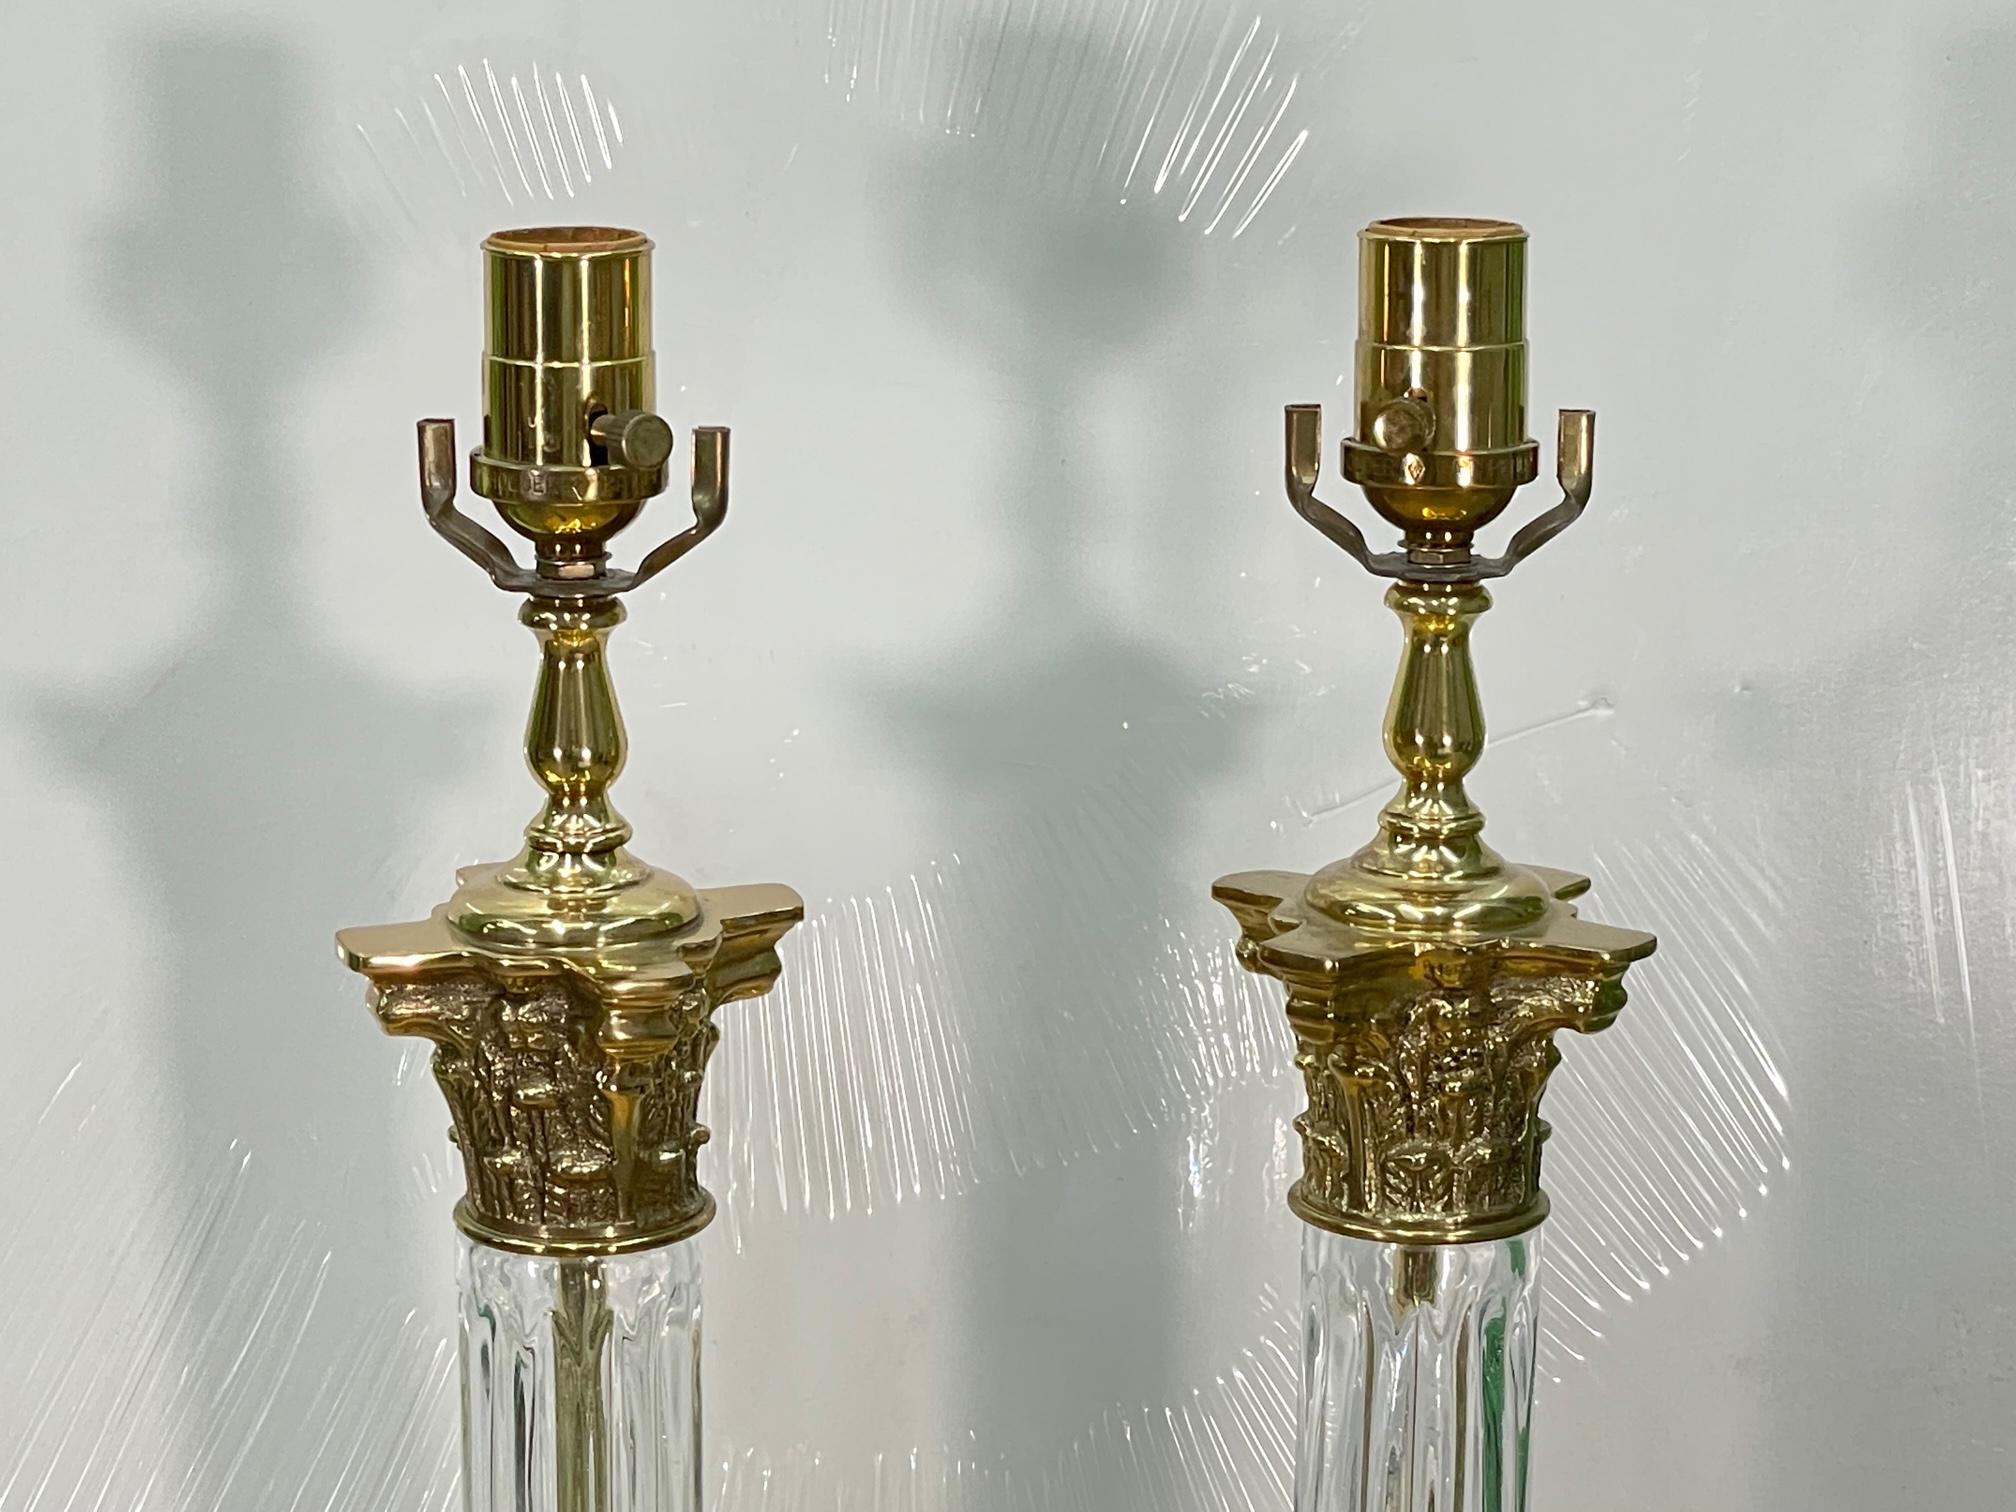 Pair of brass and crystal Roman column table lamps feature Corinthian capitals and fluted crystal shafts. Good condition with minor imperfections consistent with age, see photos for condition details. 
For a shipping quote to your exact zip code,